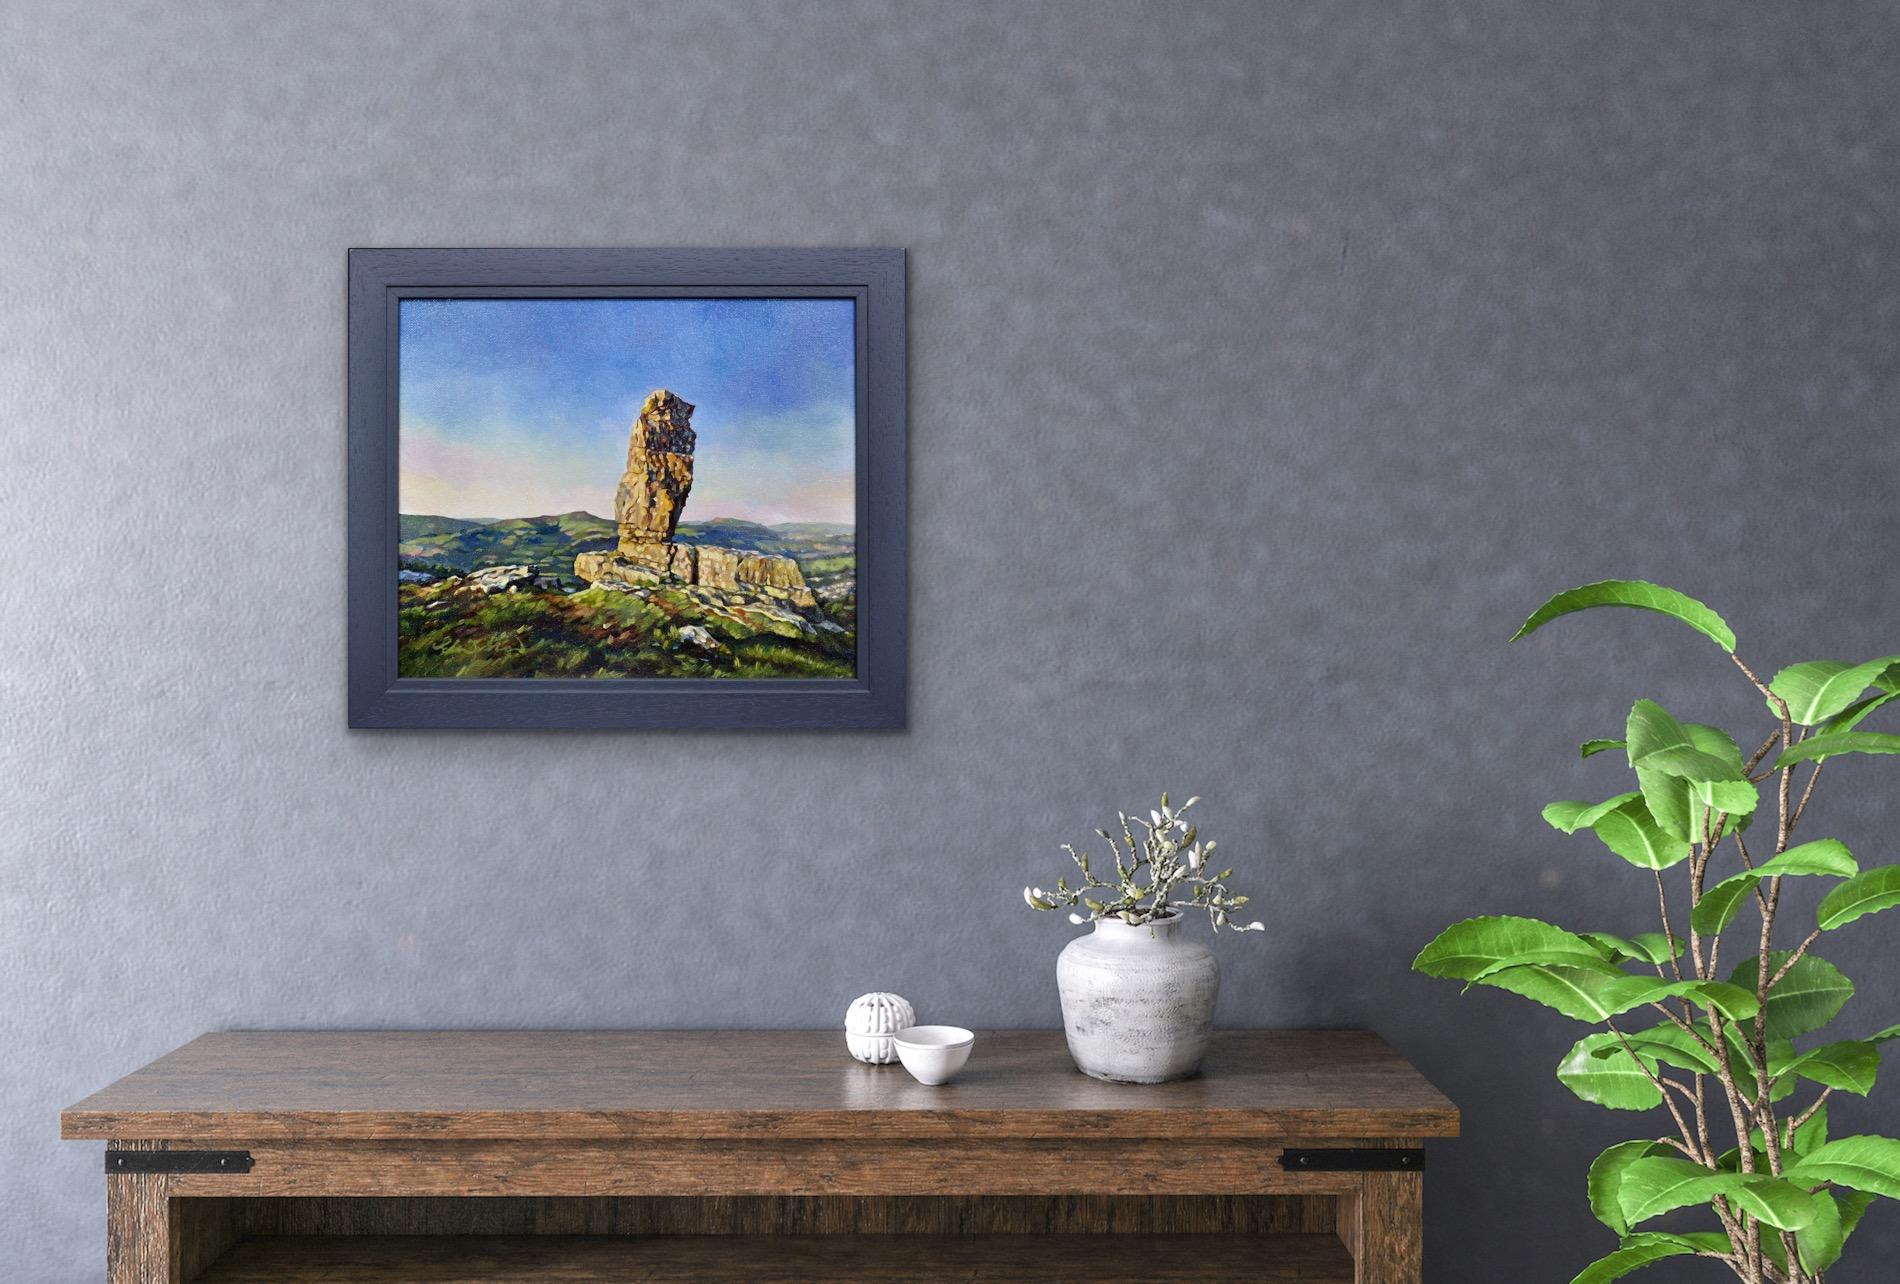 Y Bugail Unig (The Lonely Shepherd), Llangattock, Brecon Beacons. Welsh Folklore For Sale 8